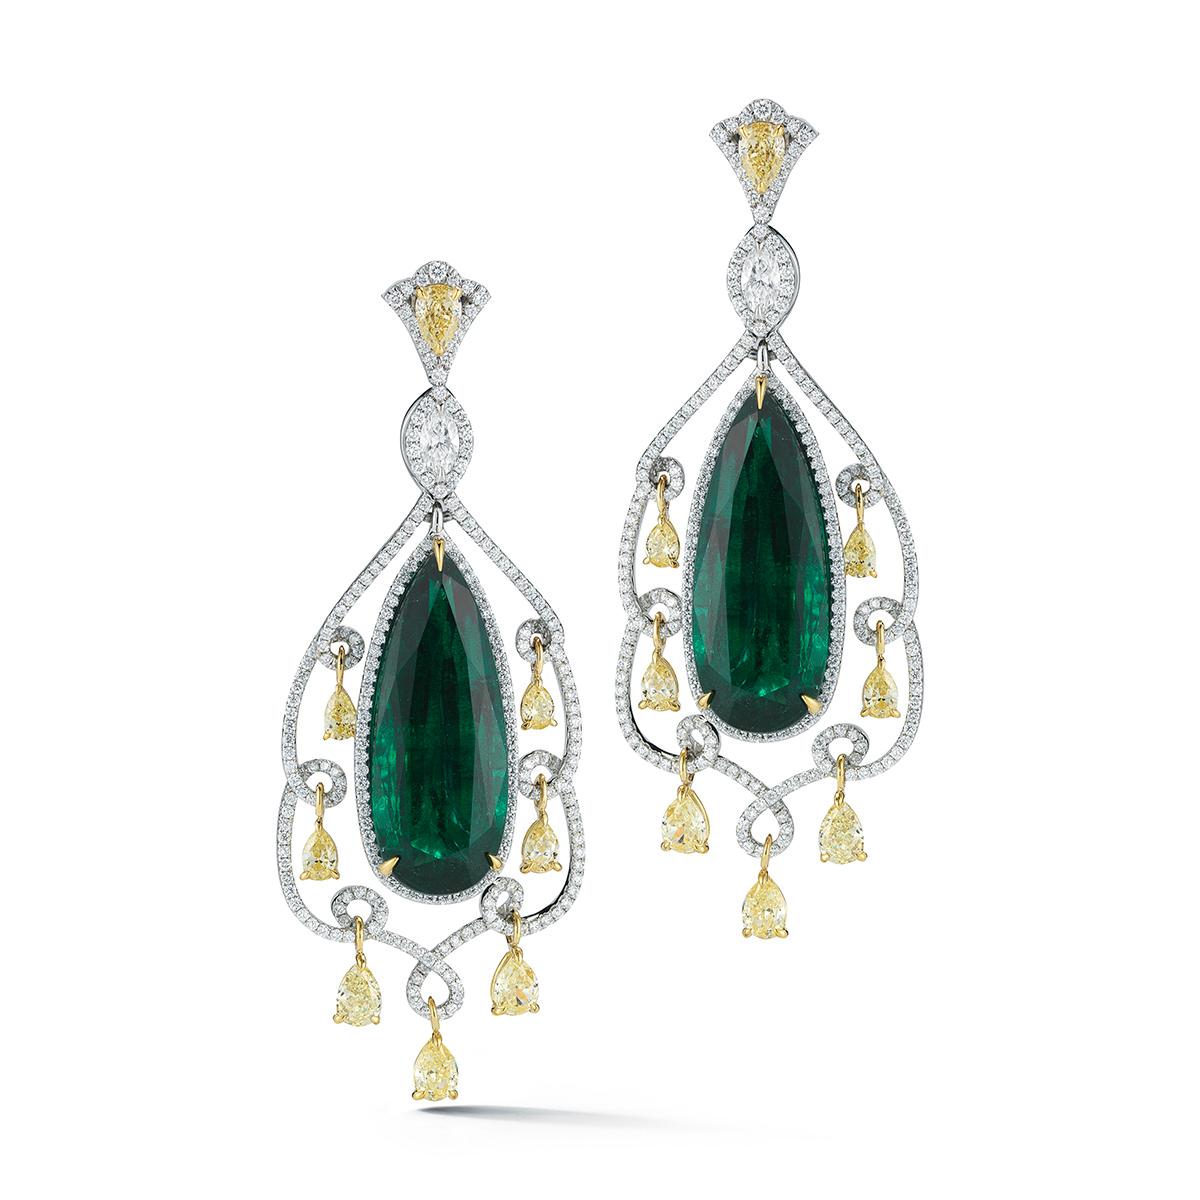 THE EMERALD DECADENCE EARRINGS BY RAYAZTAKAT
The deep green of these certified Emeralds is intensified by the delicate movement of yellow diamond drops.
Item:	# 02383
Metal:	18k W / Y
Lab:	Gia
Color Weight:	38.85 ct.
Diamond Weight:	16.43 ct.
